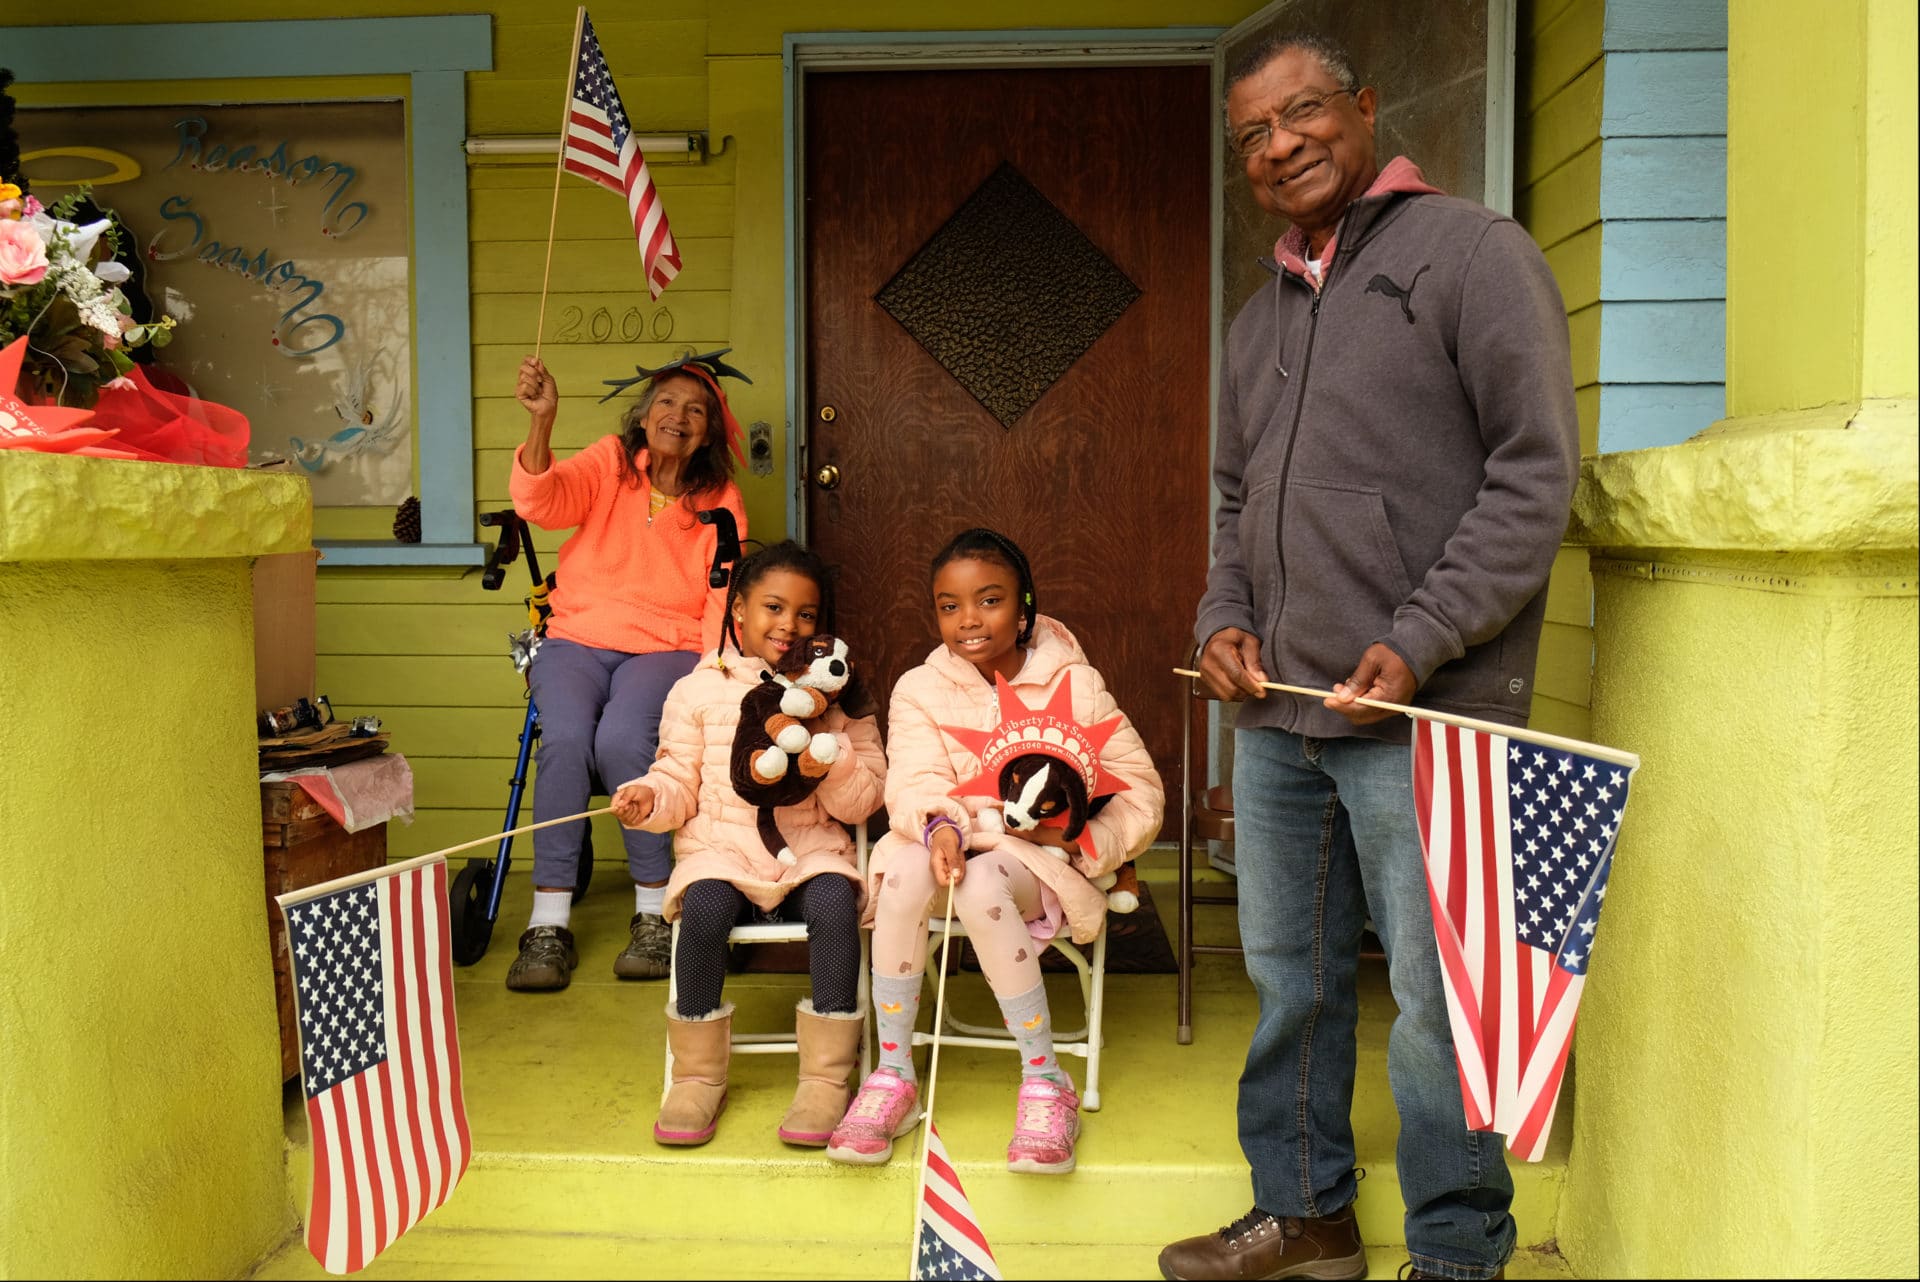 Sisters Isley and Manhattan are holding flags with their grandparents, Luz and Fabio Castillo. The Castillos have lived on Martin Luther King Jr. Boulevard for 43 years and have seen every parade from their porch since the start in 1985. The girls sit with their stuffed dogs, Spotty and Brownie, and say their favorite part of the parade is watching the horses.